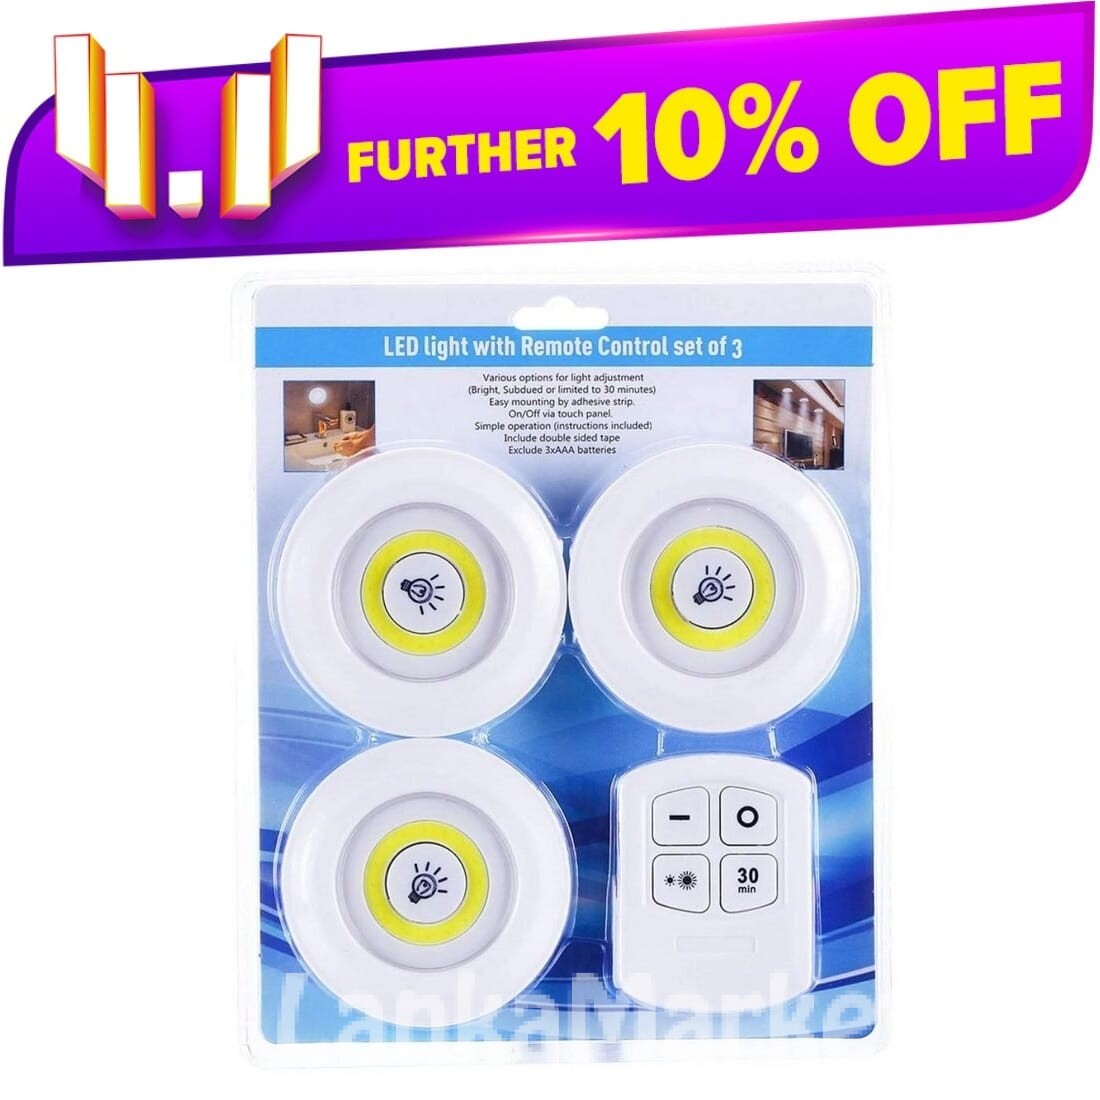 3 Emergency led lights with remote control